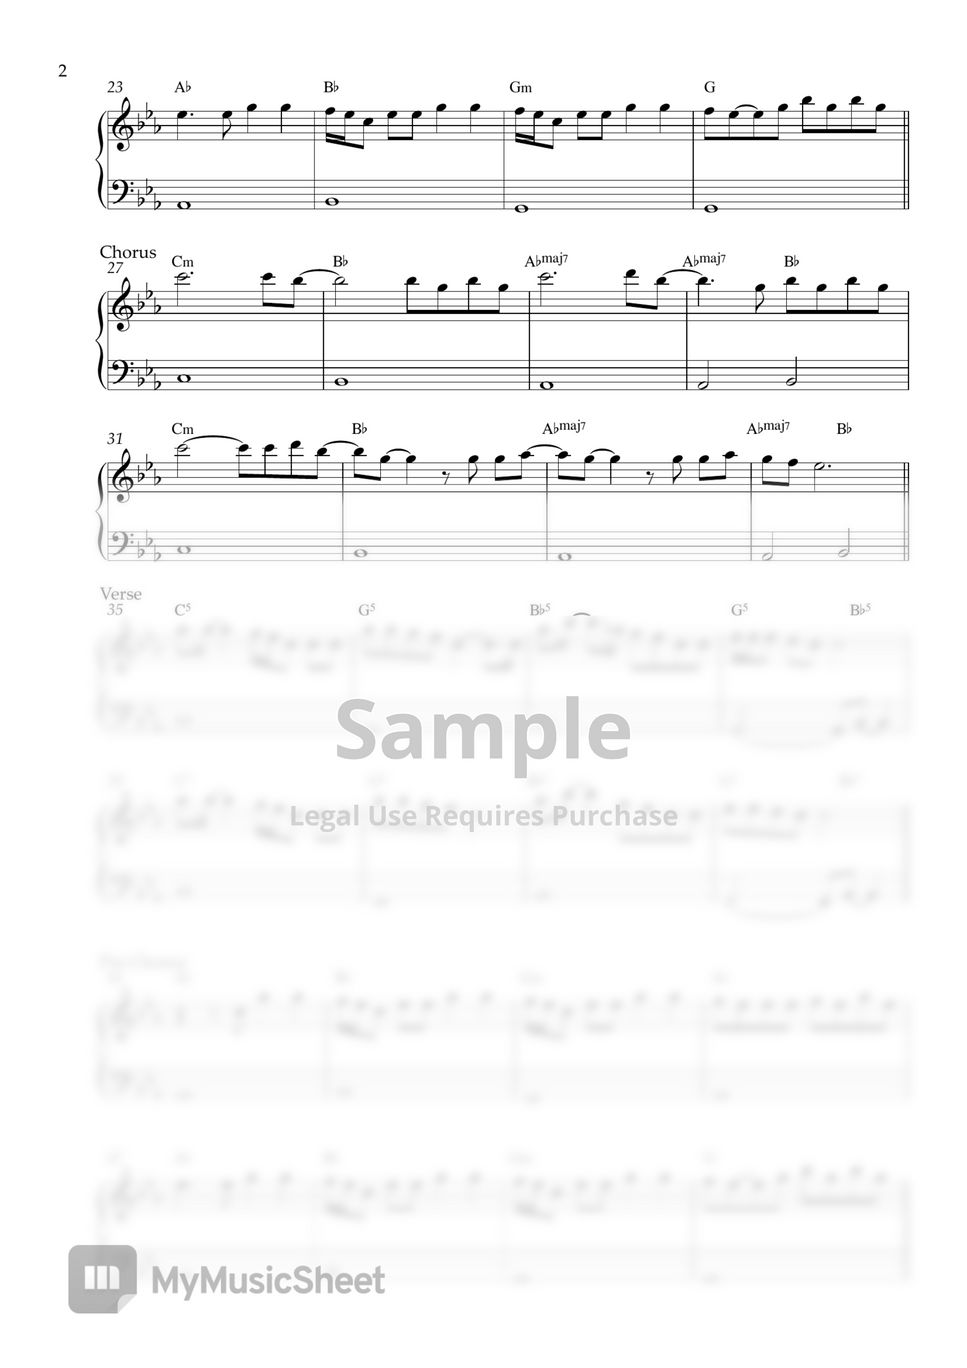 Adele - Rolling in the Deep (EASY PIANO SHEET) by Pianella Piano